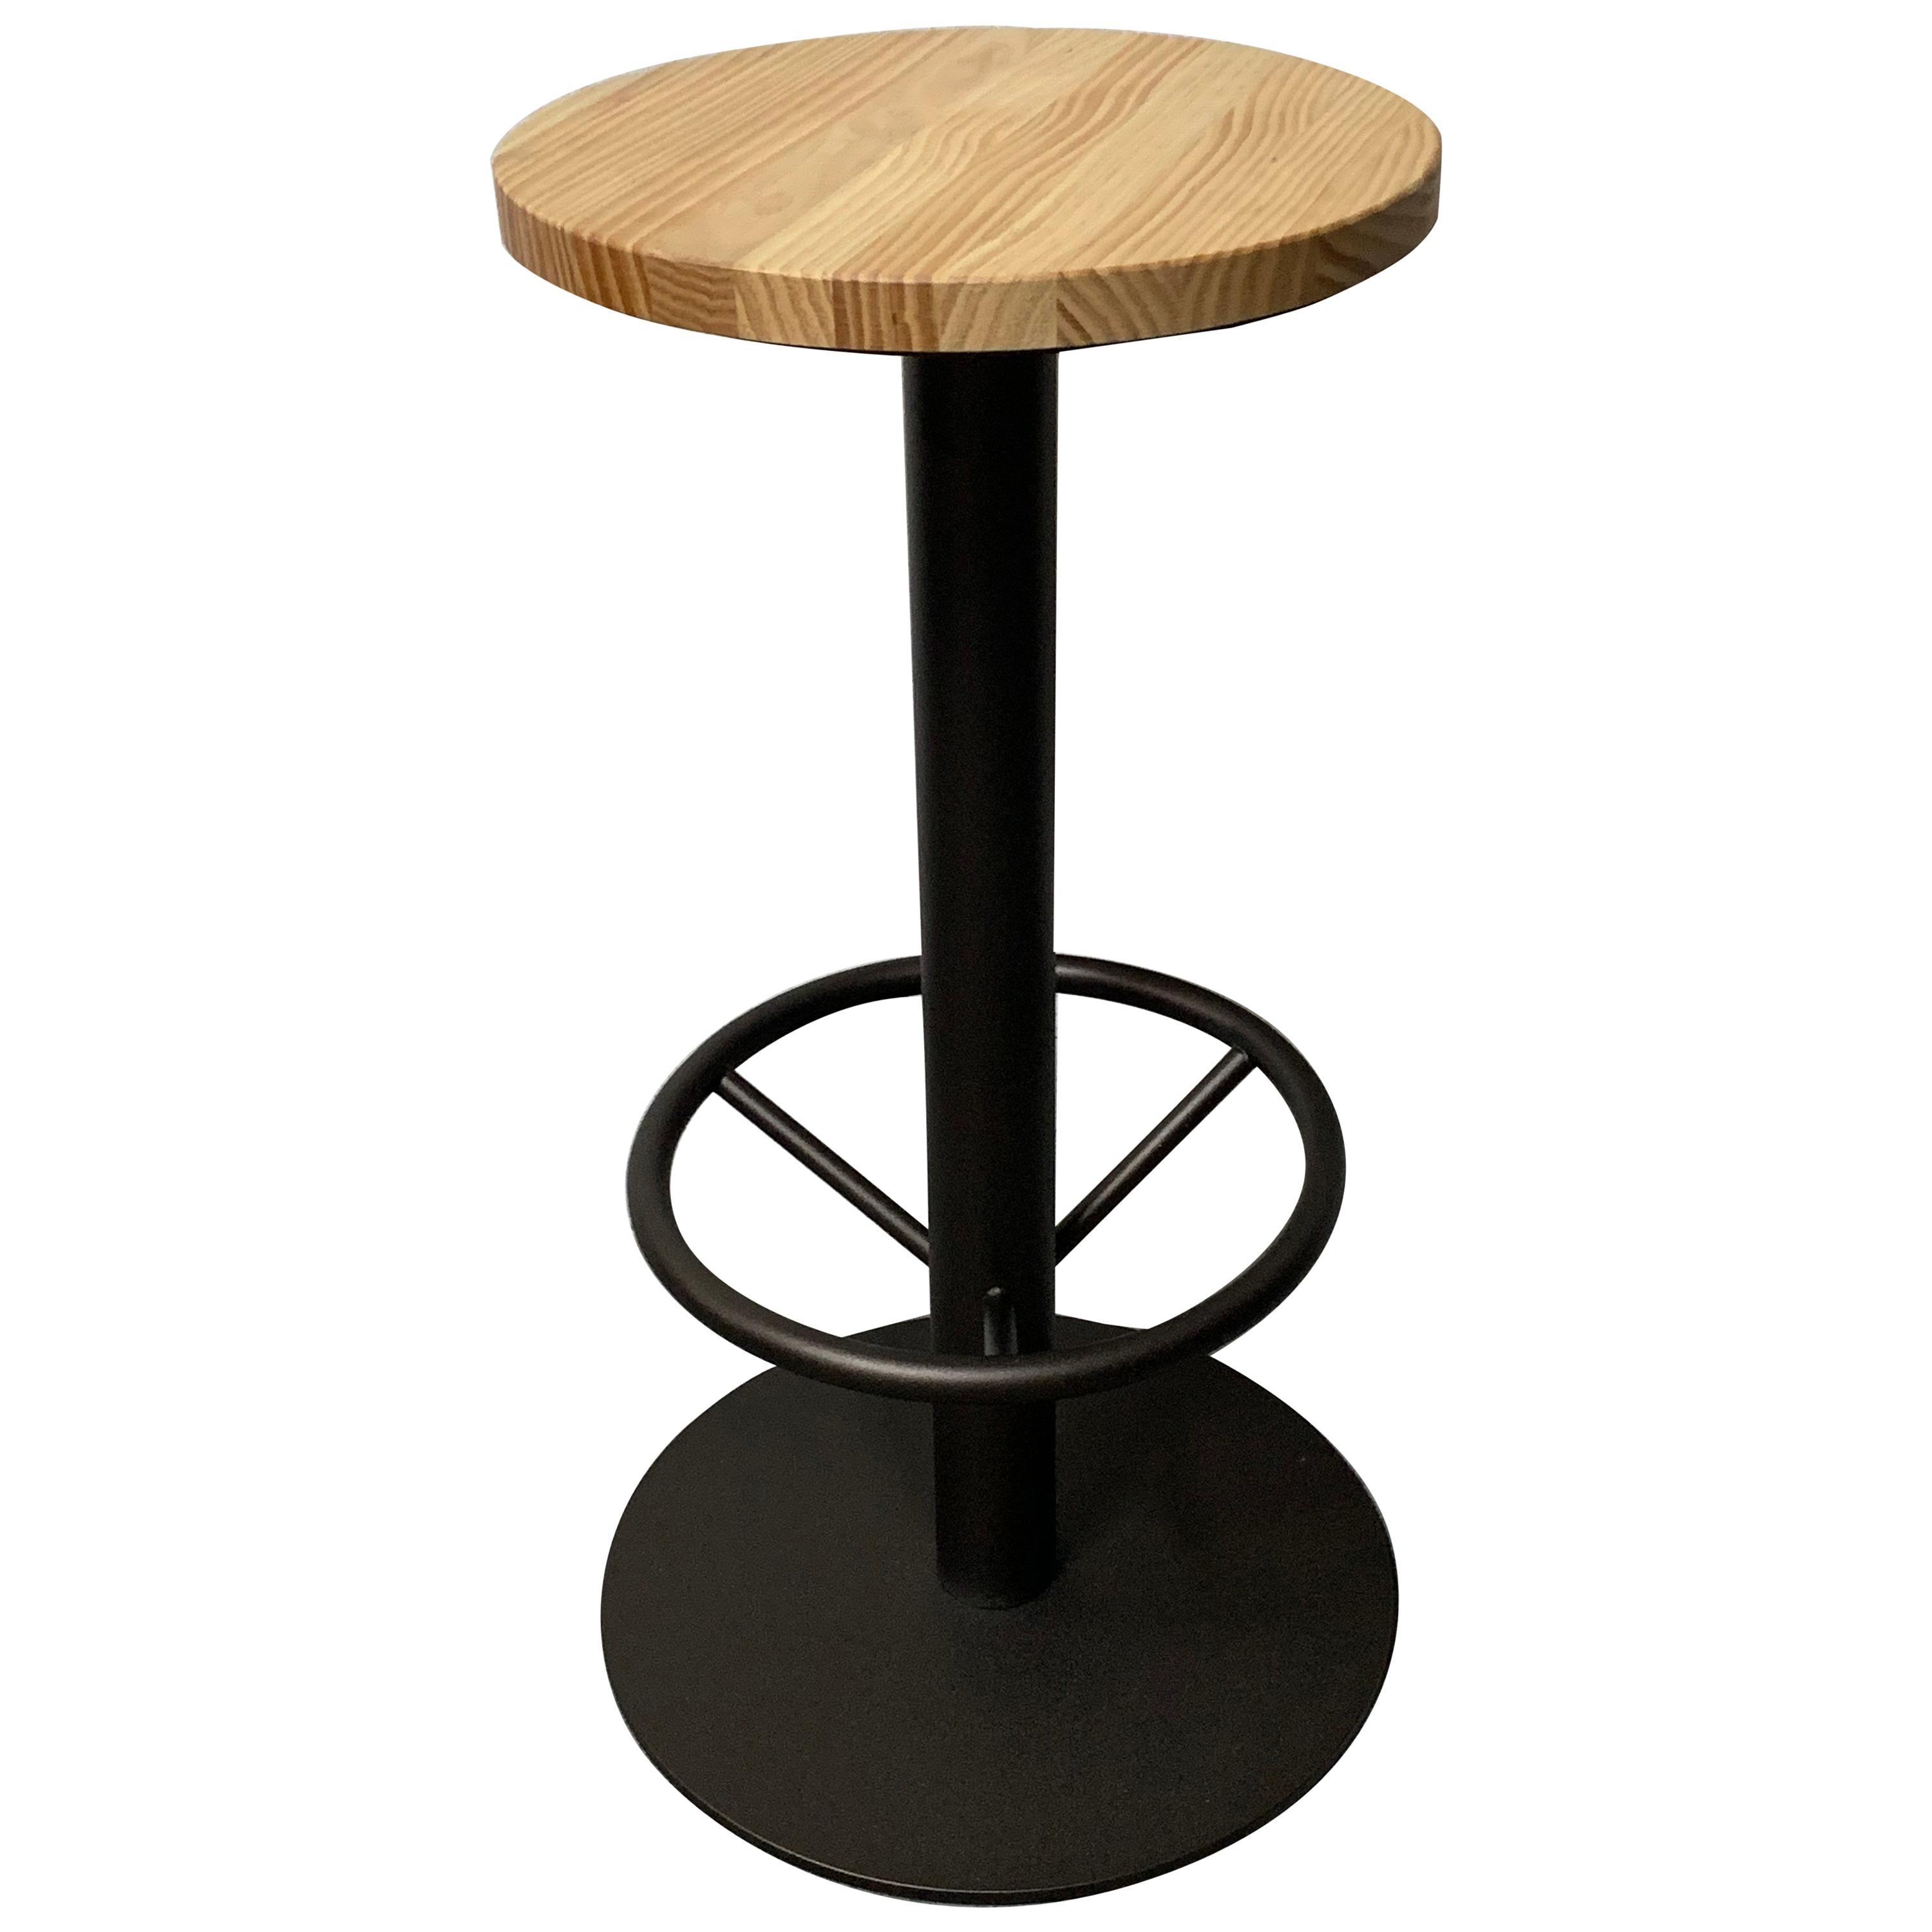 New Industrial Wrought Iron Shop Stool with Pine Wood Seat For Sale